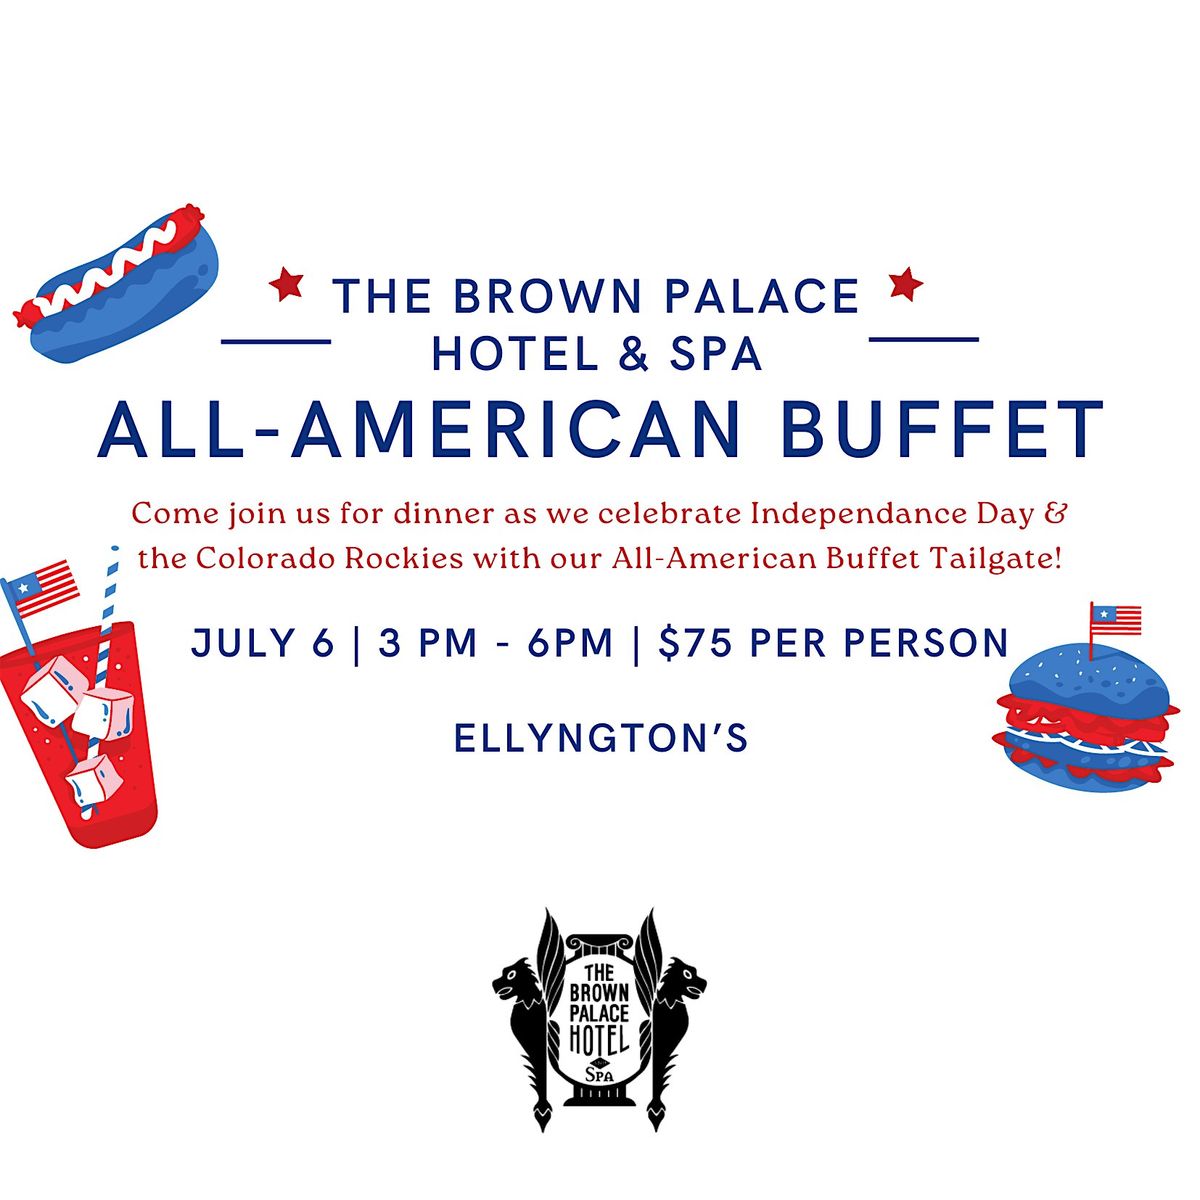 All-American Buffet Tailgate for the Colorado Rockies Game